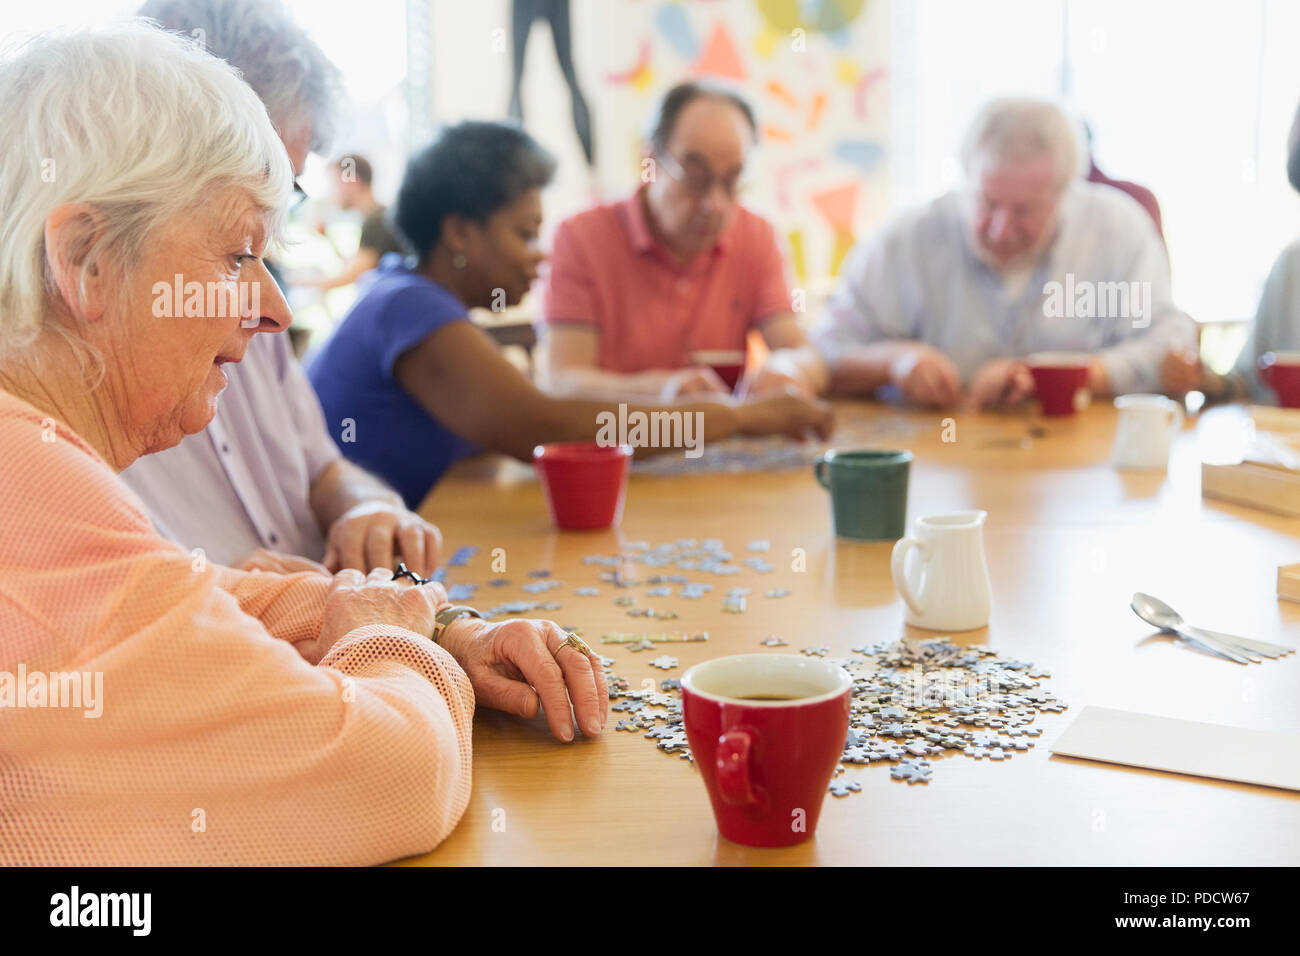 Senior woman assembling jigsaw puzzle with friends at table in community center Stock Photo